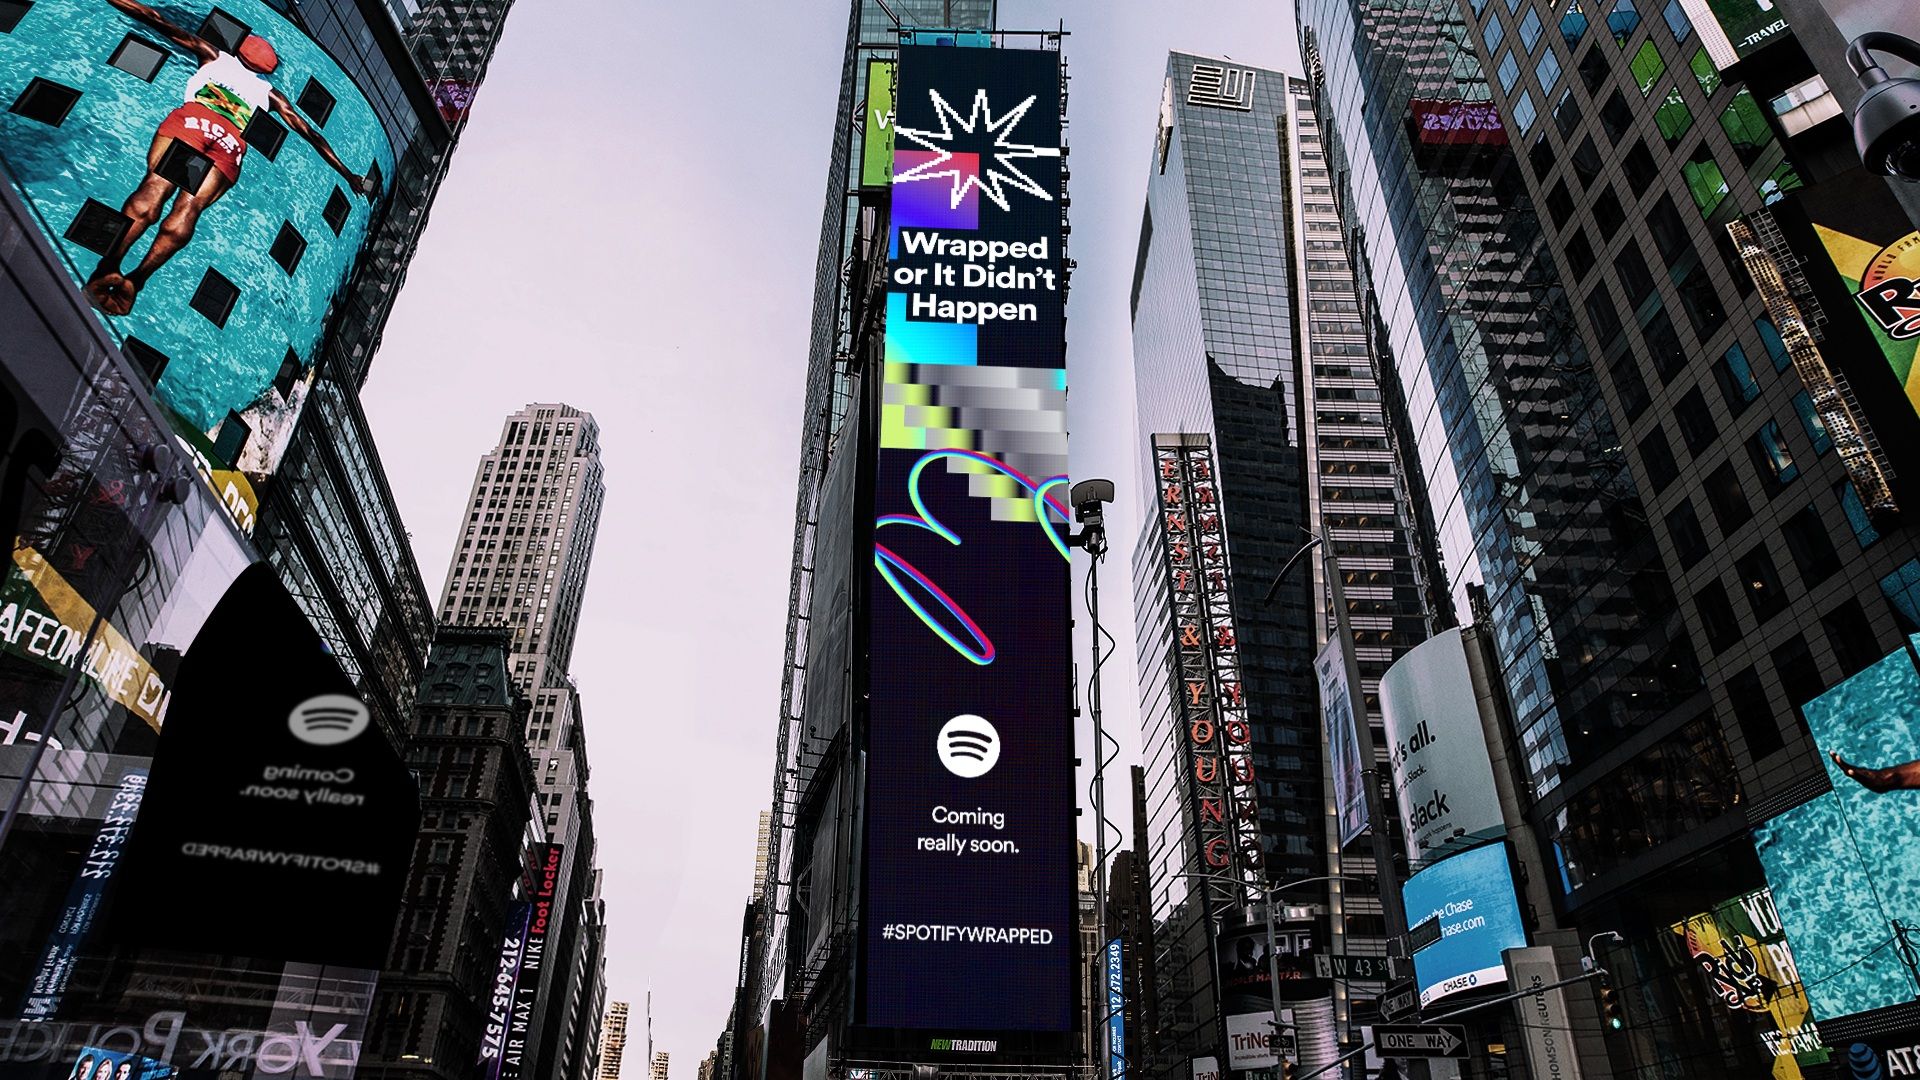 An image of Times Square in New York City with a billboard for Spotify Wrapped 2023